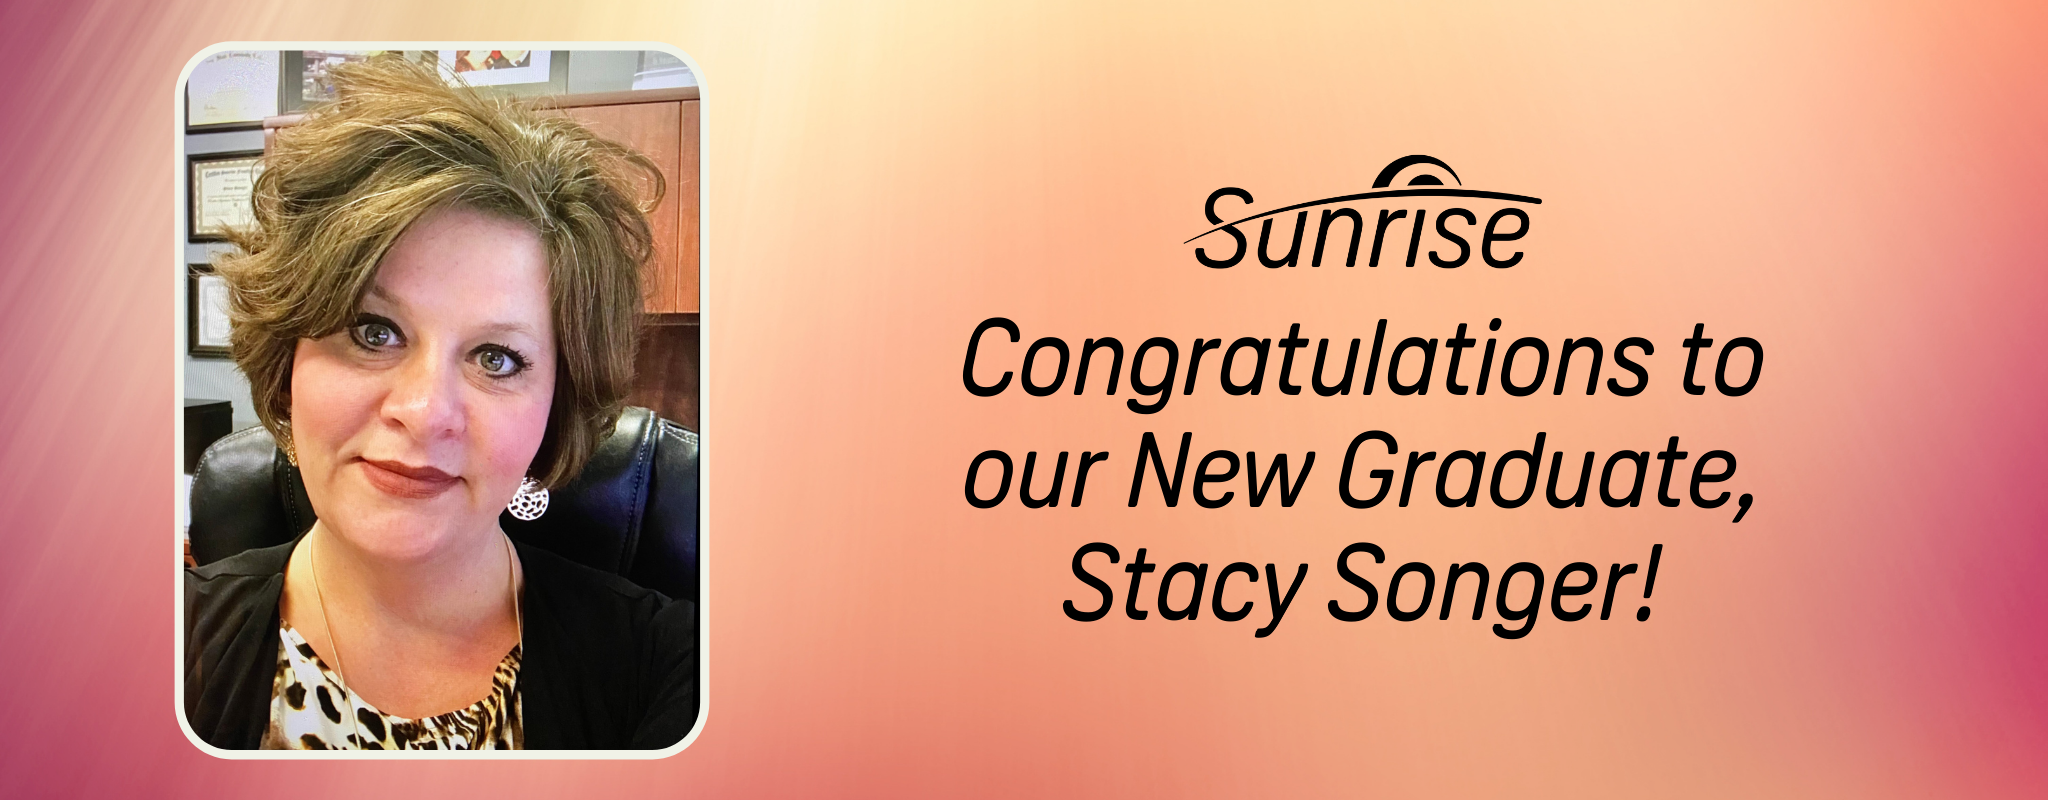 Congratulations to our New Graduate, Stacy Songer!